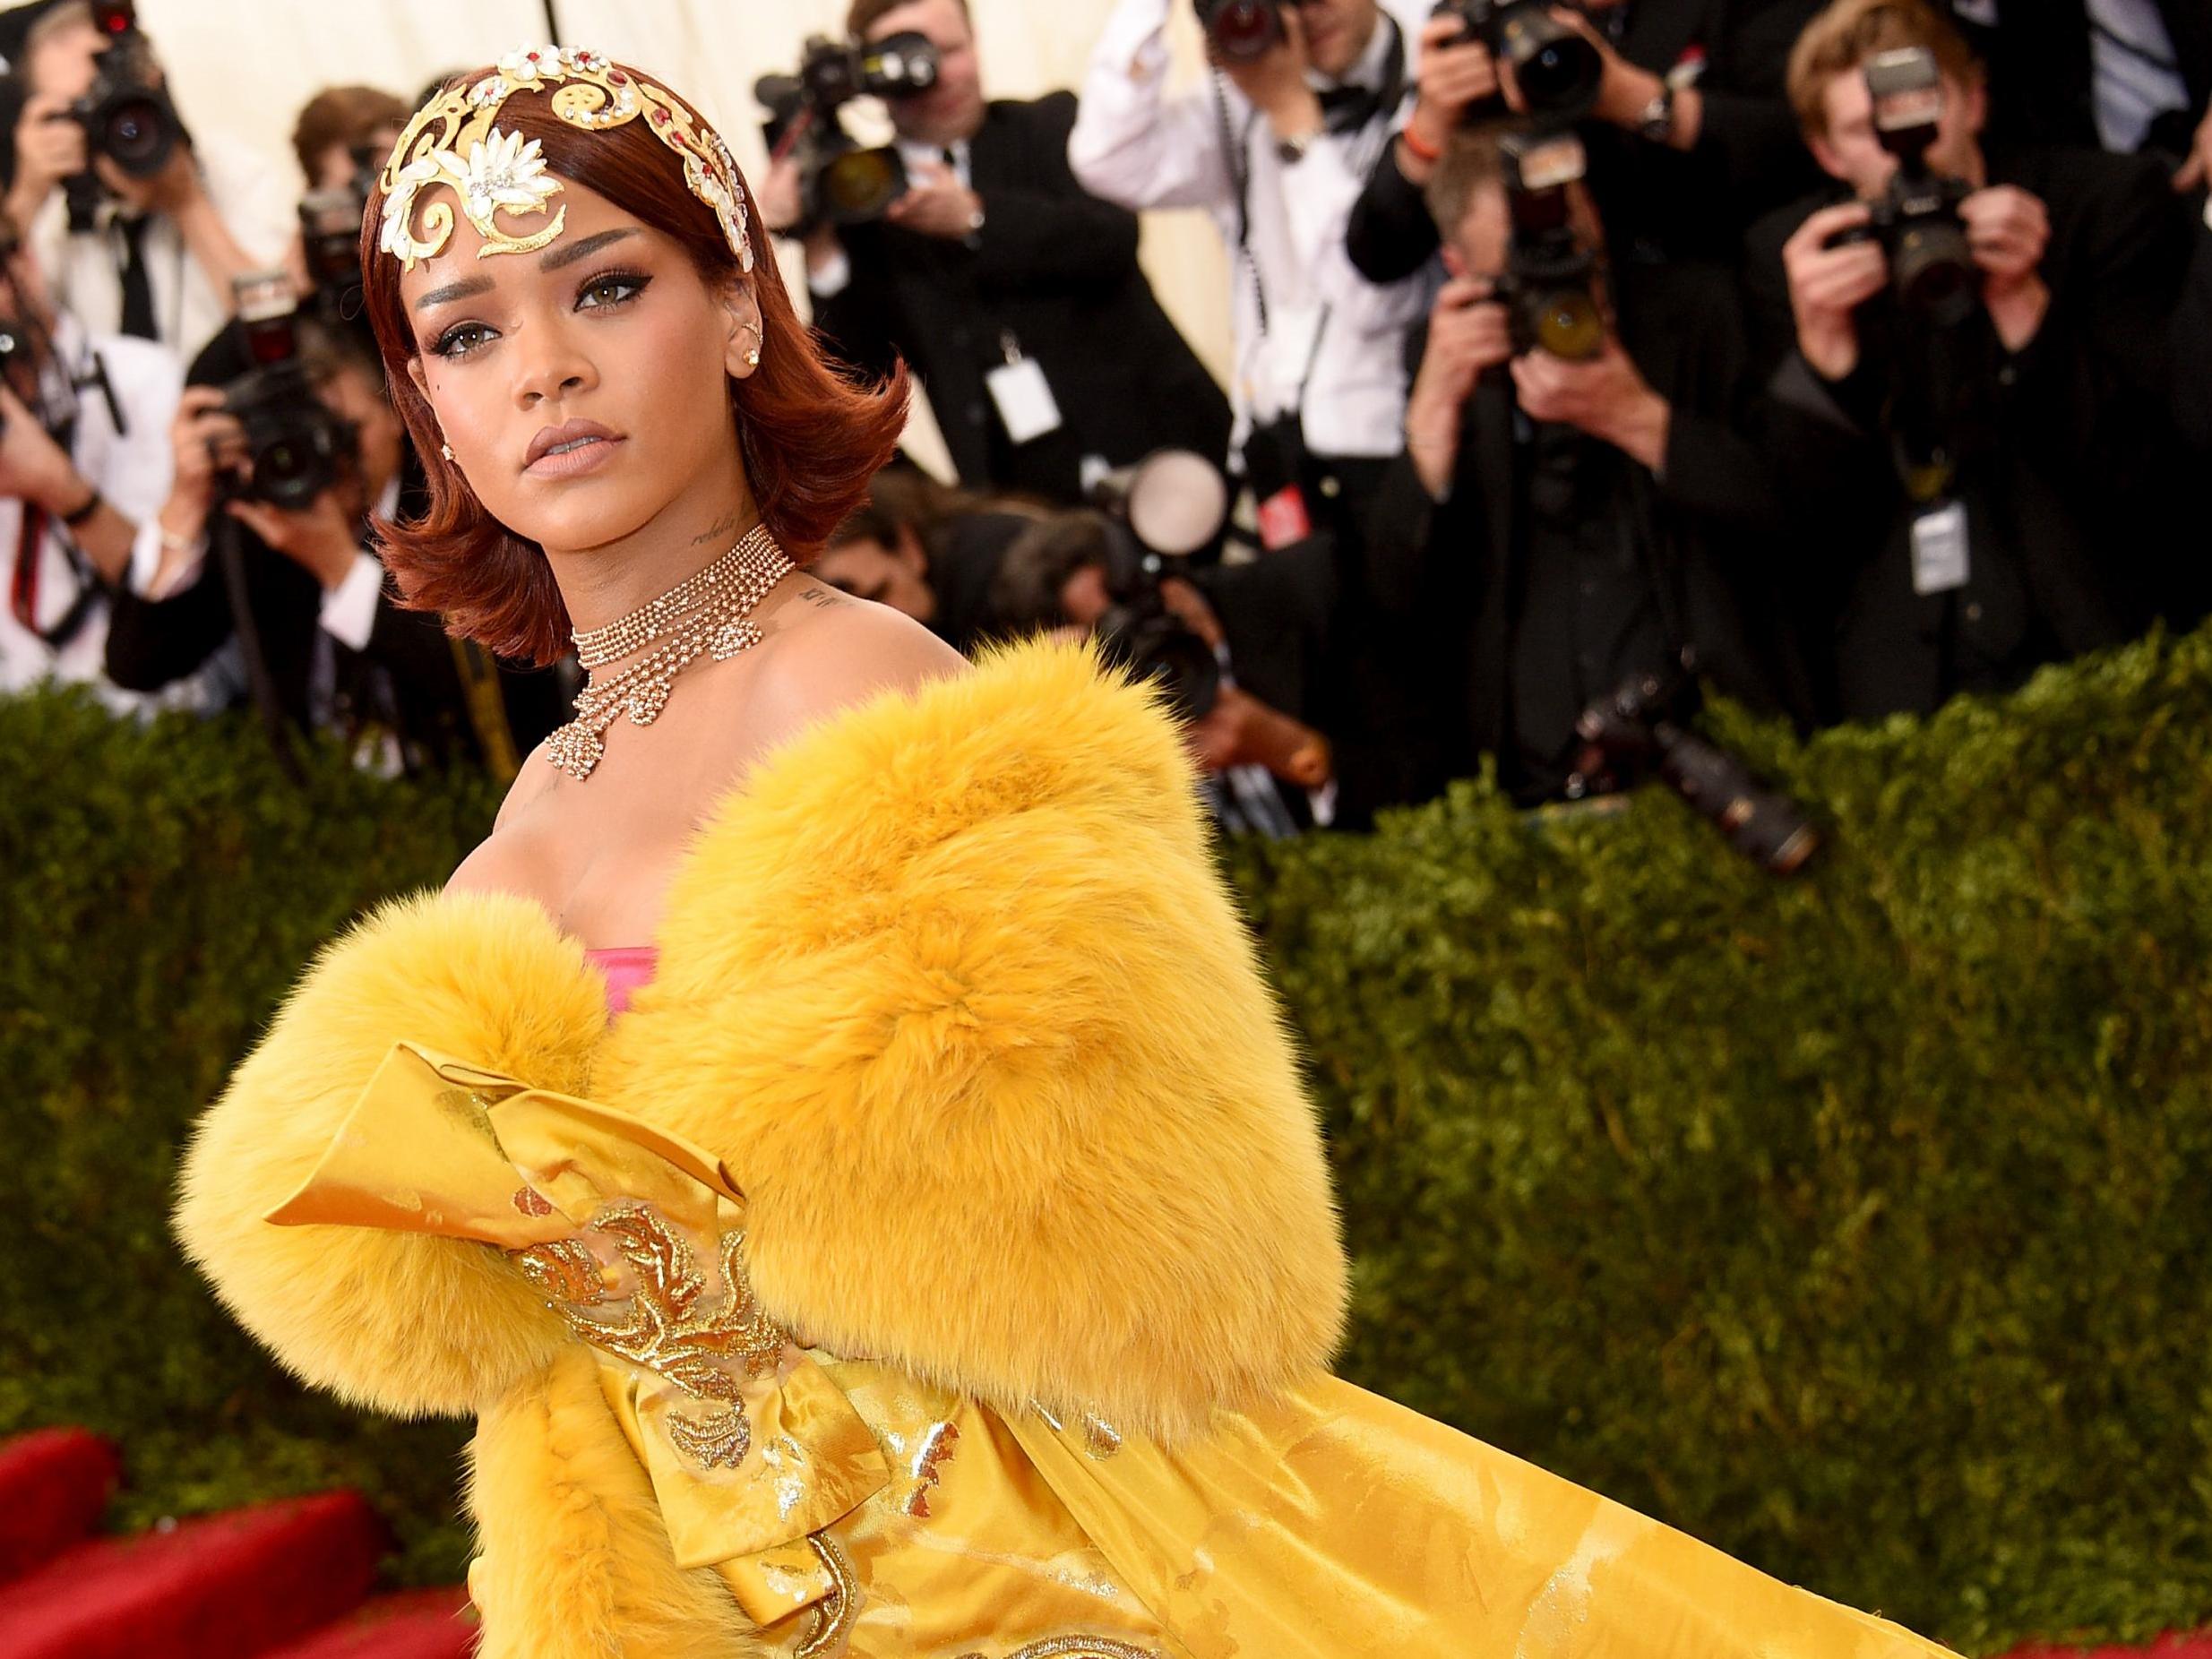 Rihanna's best looks at the Met Gala through the years